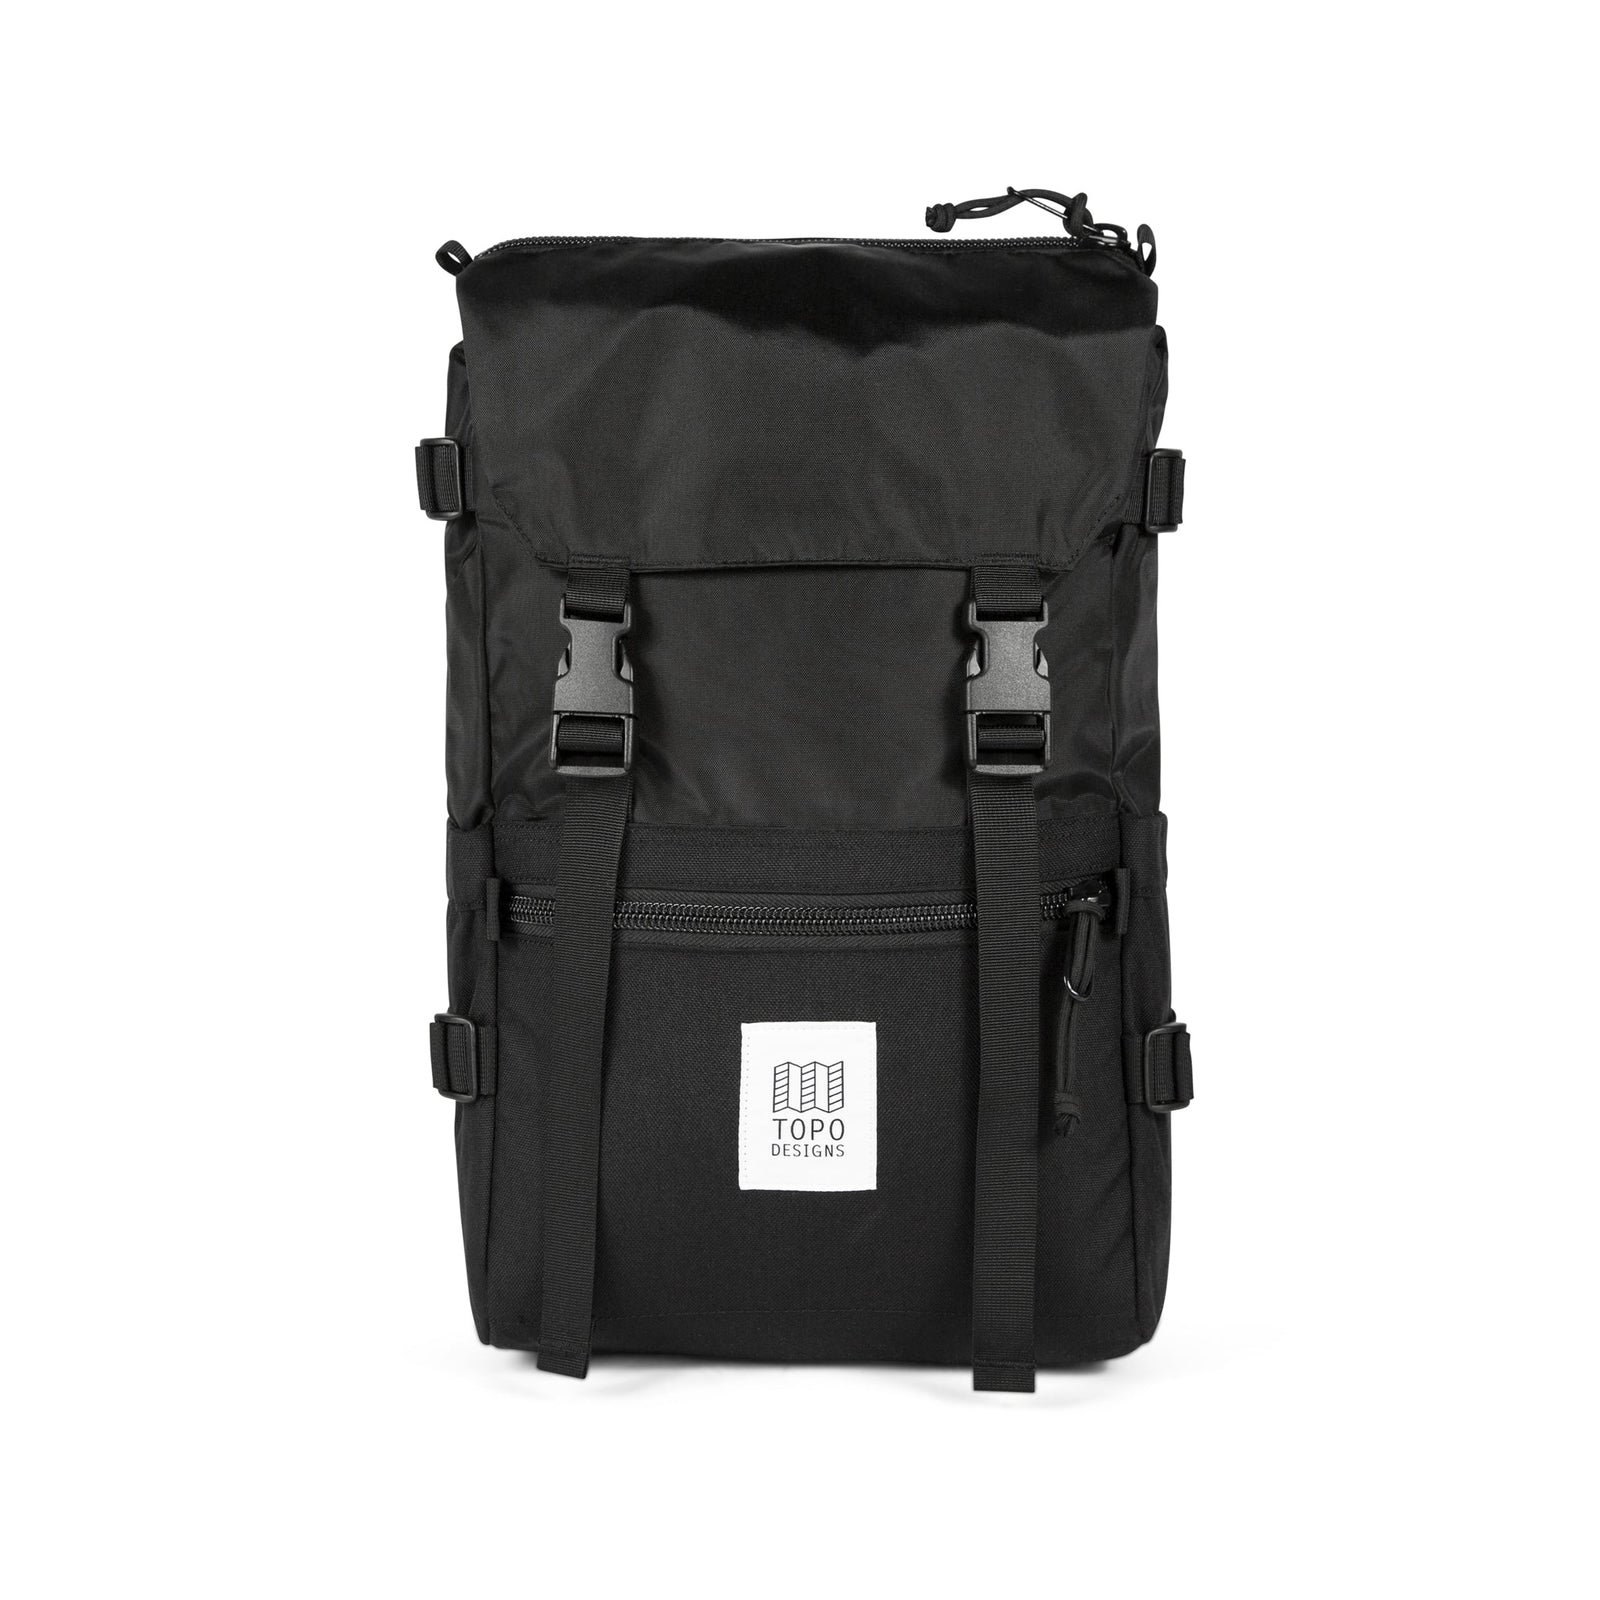 Front Product Shot of the Topo Designs Rover Pack Classic in "Black".